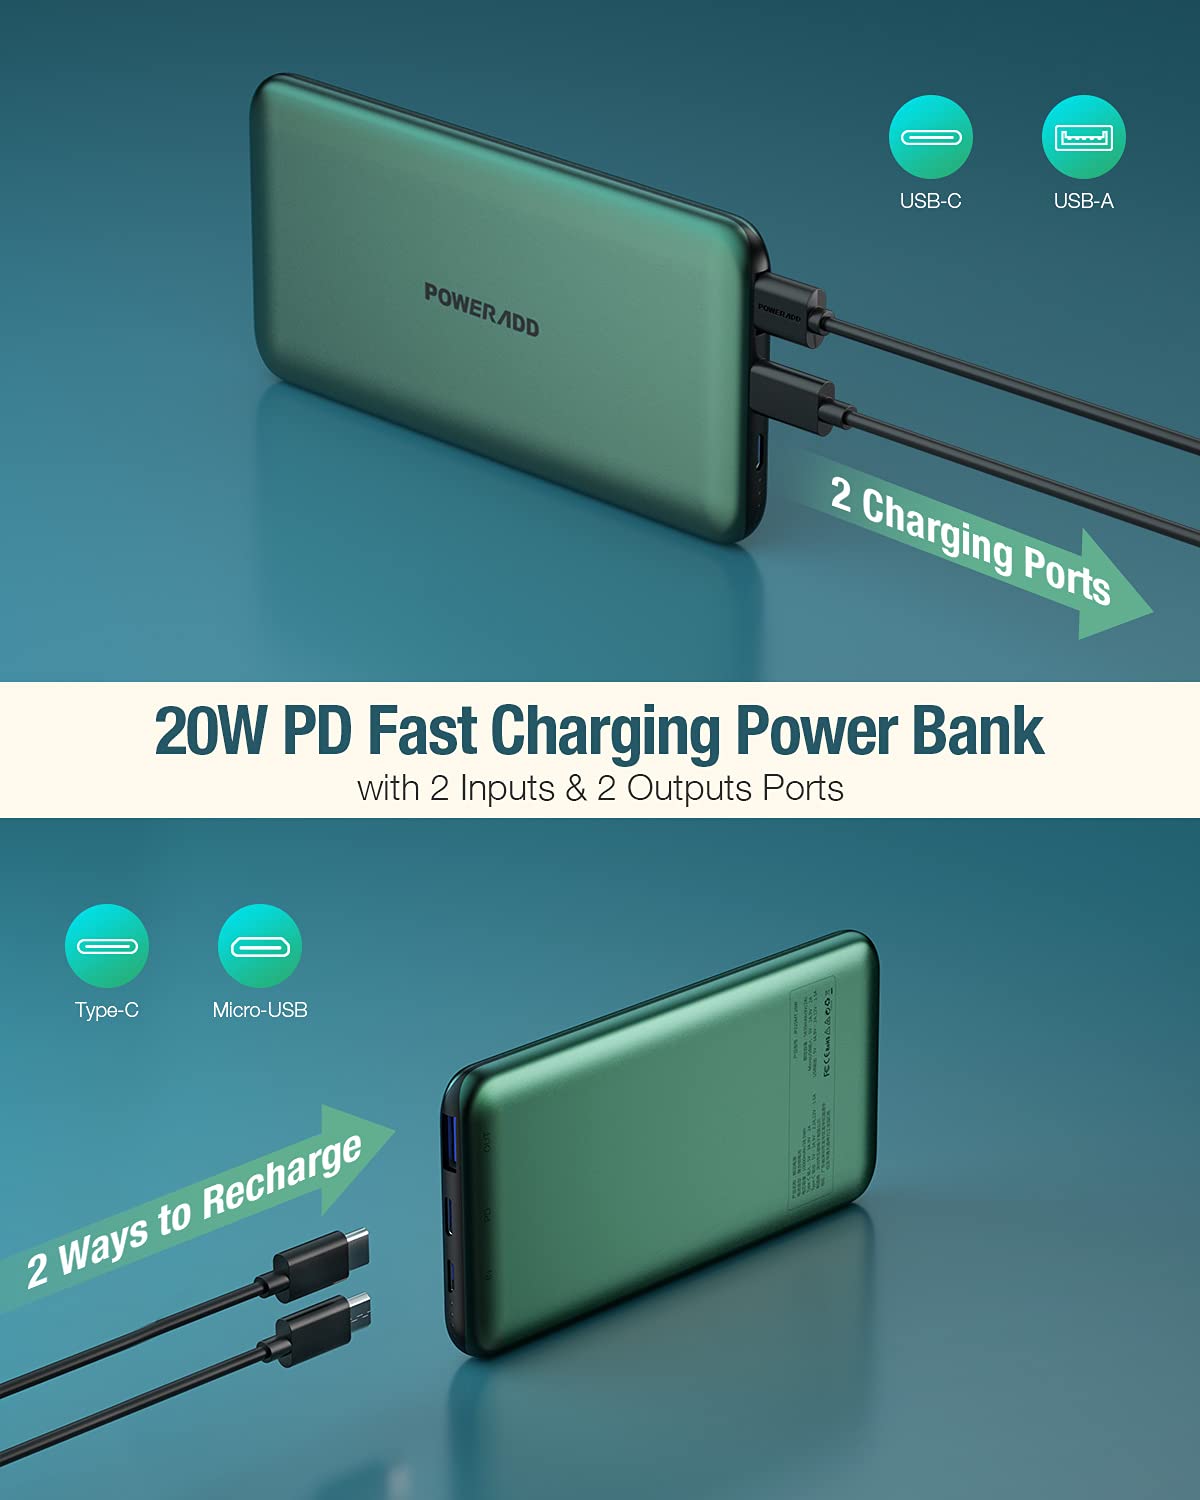 Power Bank 10000mAh Ultra Thin USB C PD20W QC3.0 Portable Charger Fast Charging with Dual Output Type-C High-Speed External Battery Pack for iPhone12, Huawei, Xiaomi, Pixel and more…